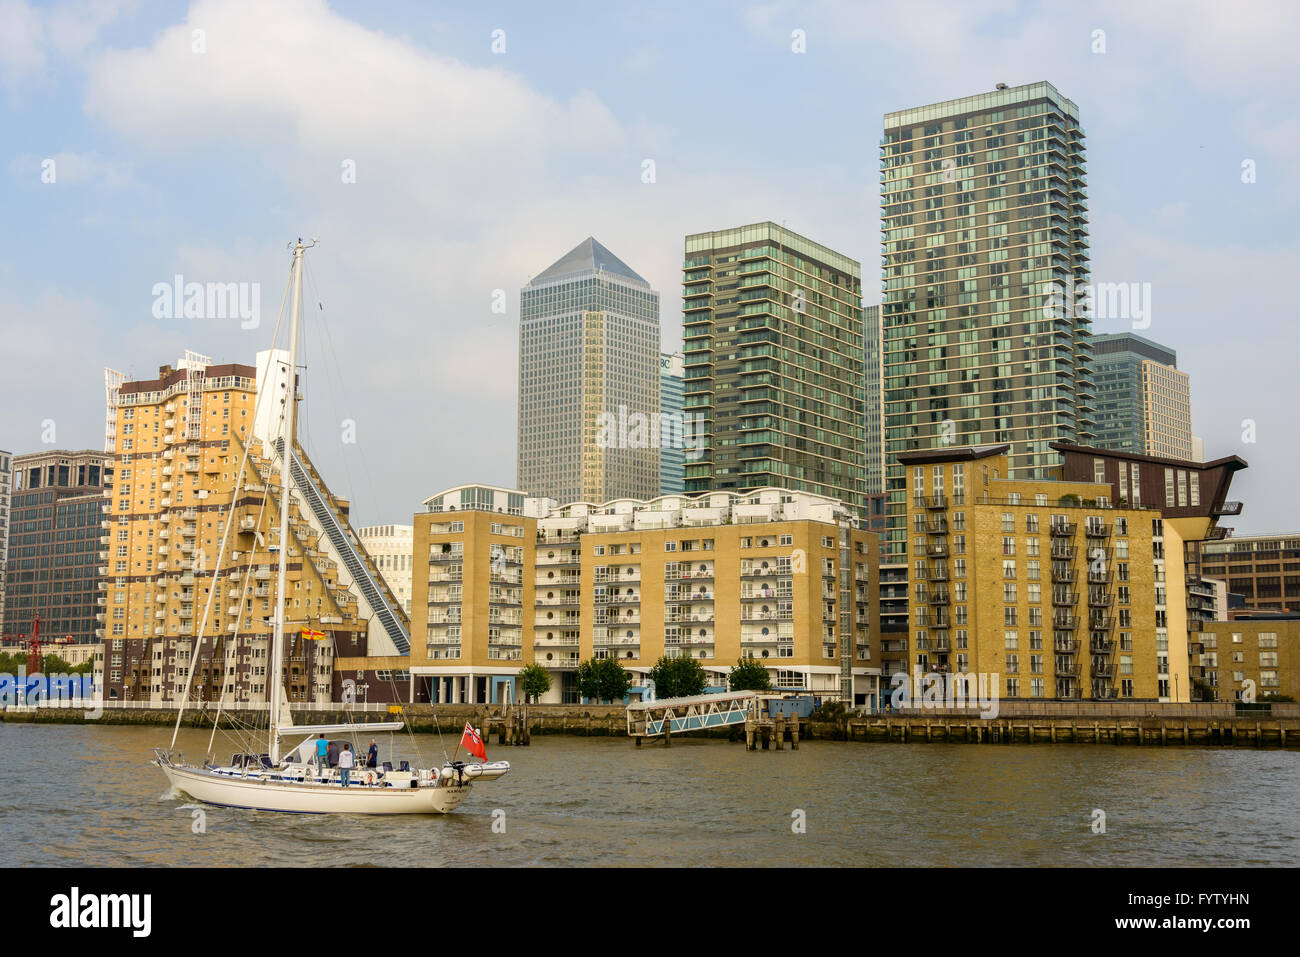 Boat on the river Thames in London, UK Stock Photo